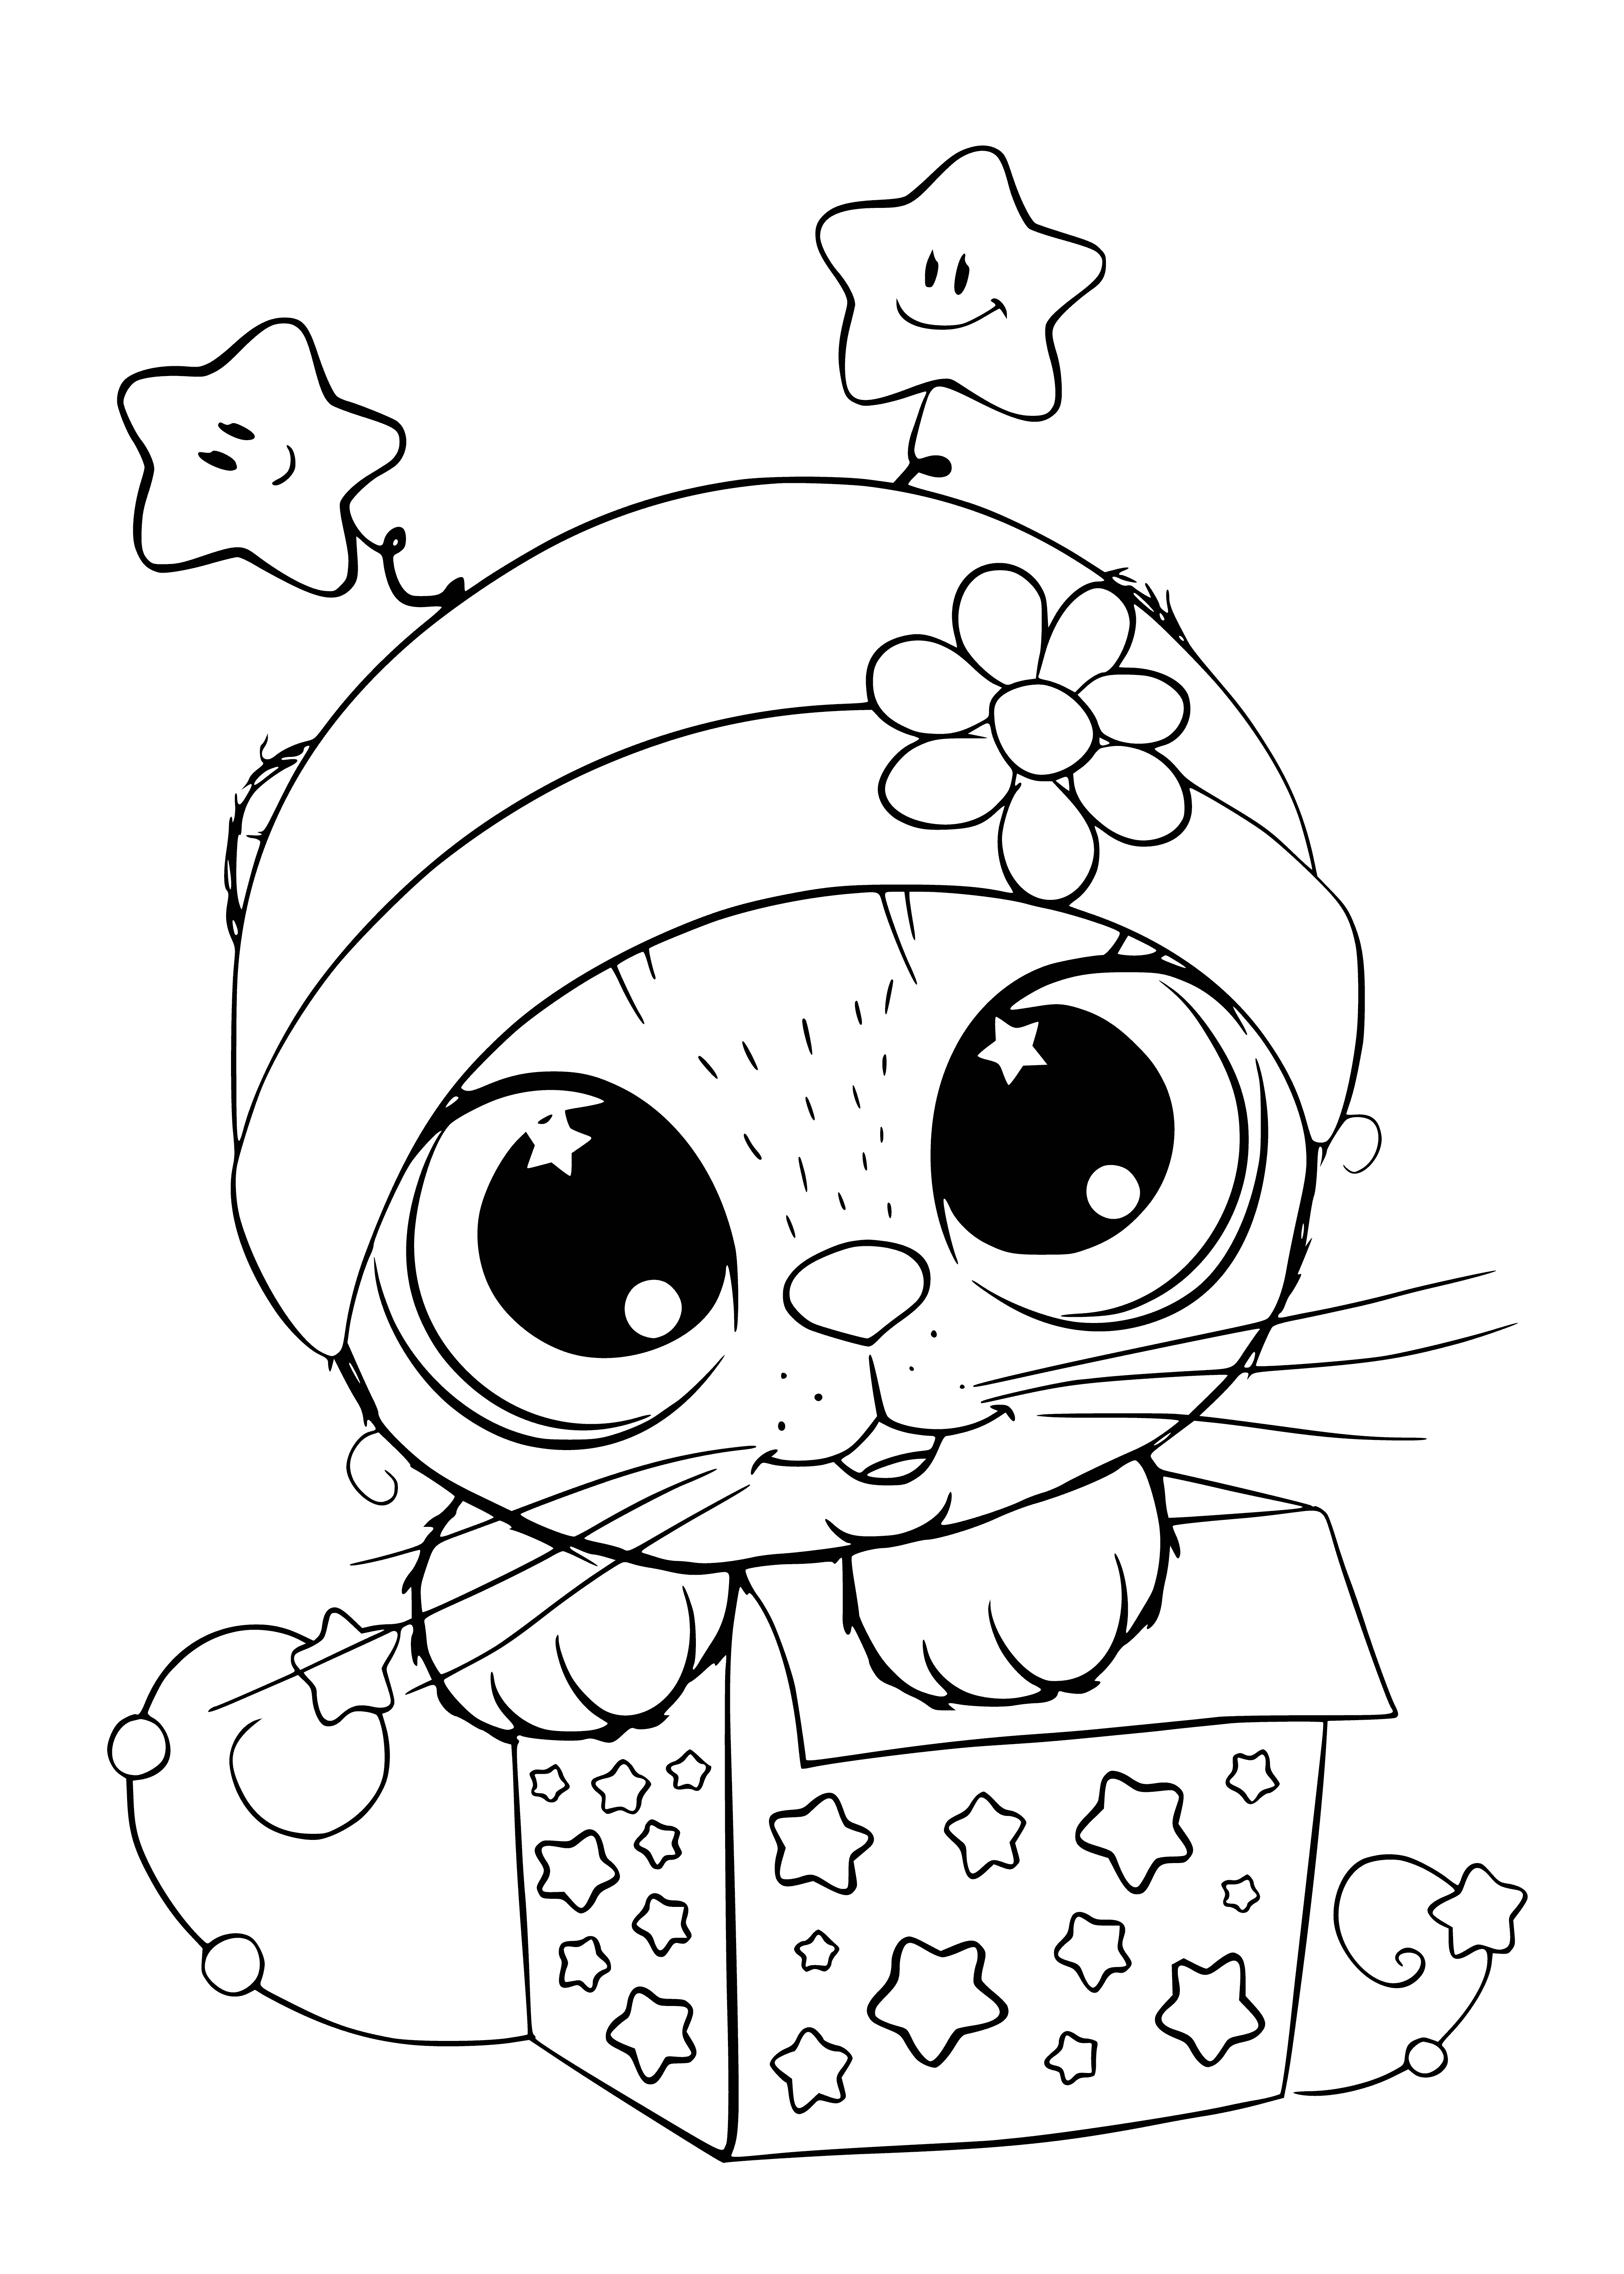 Cat in a box coloring page